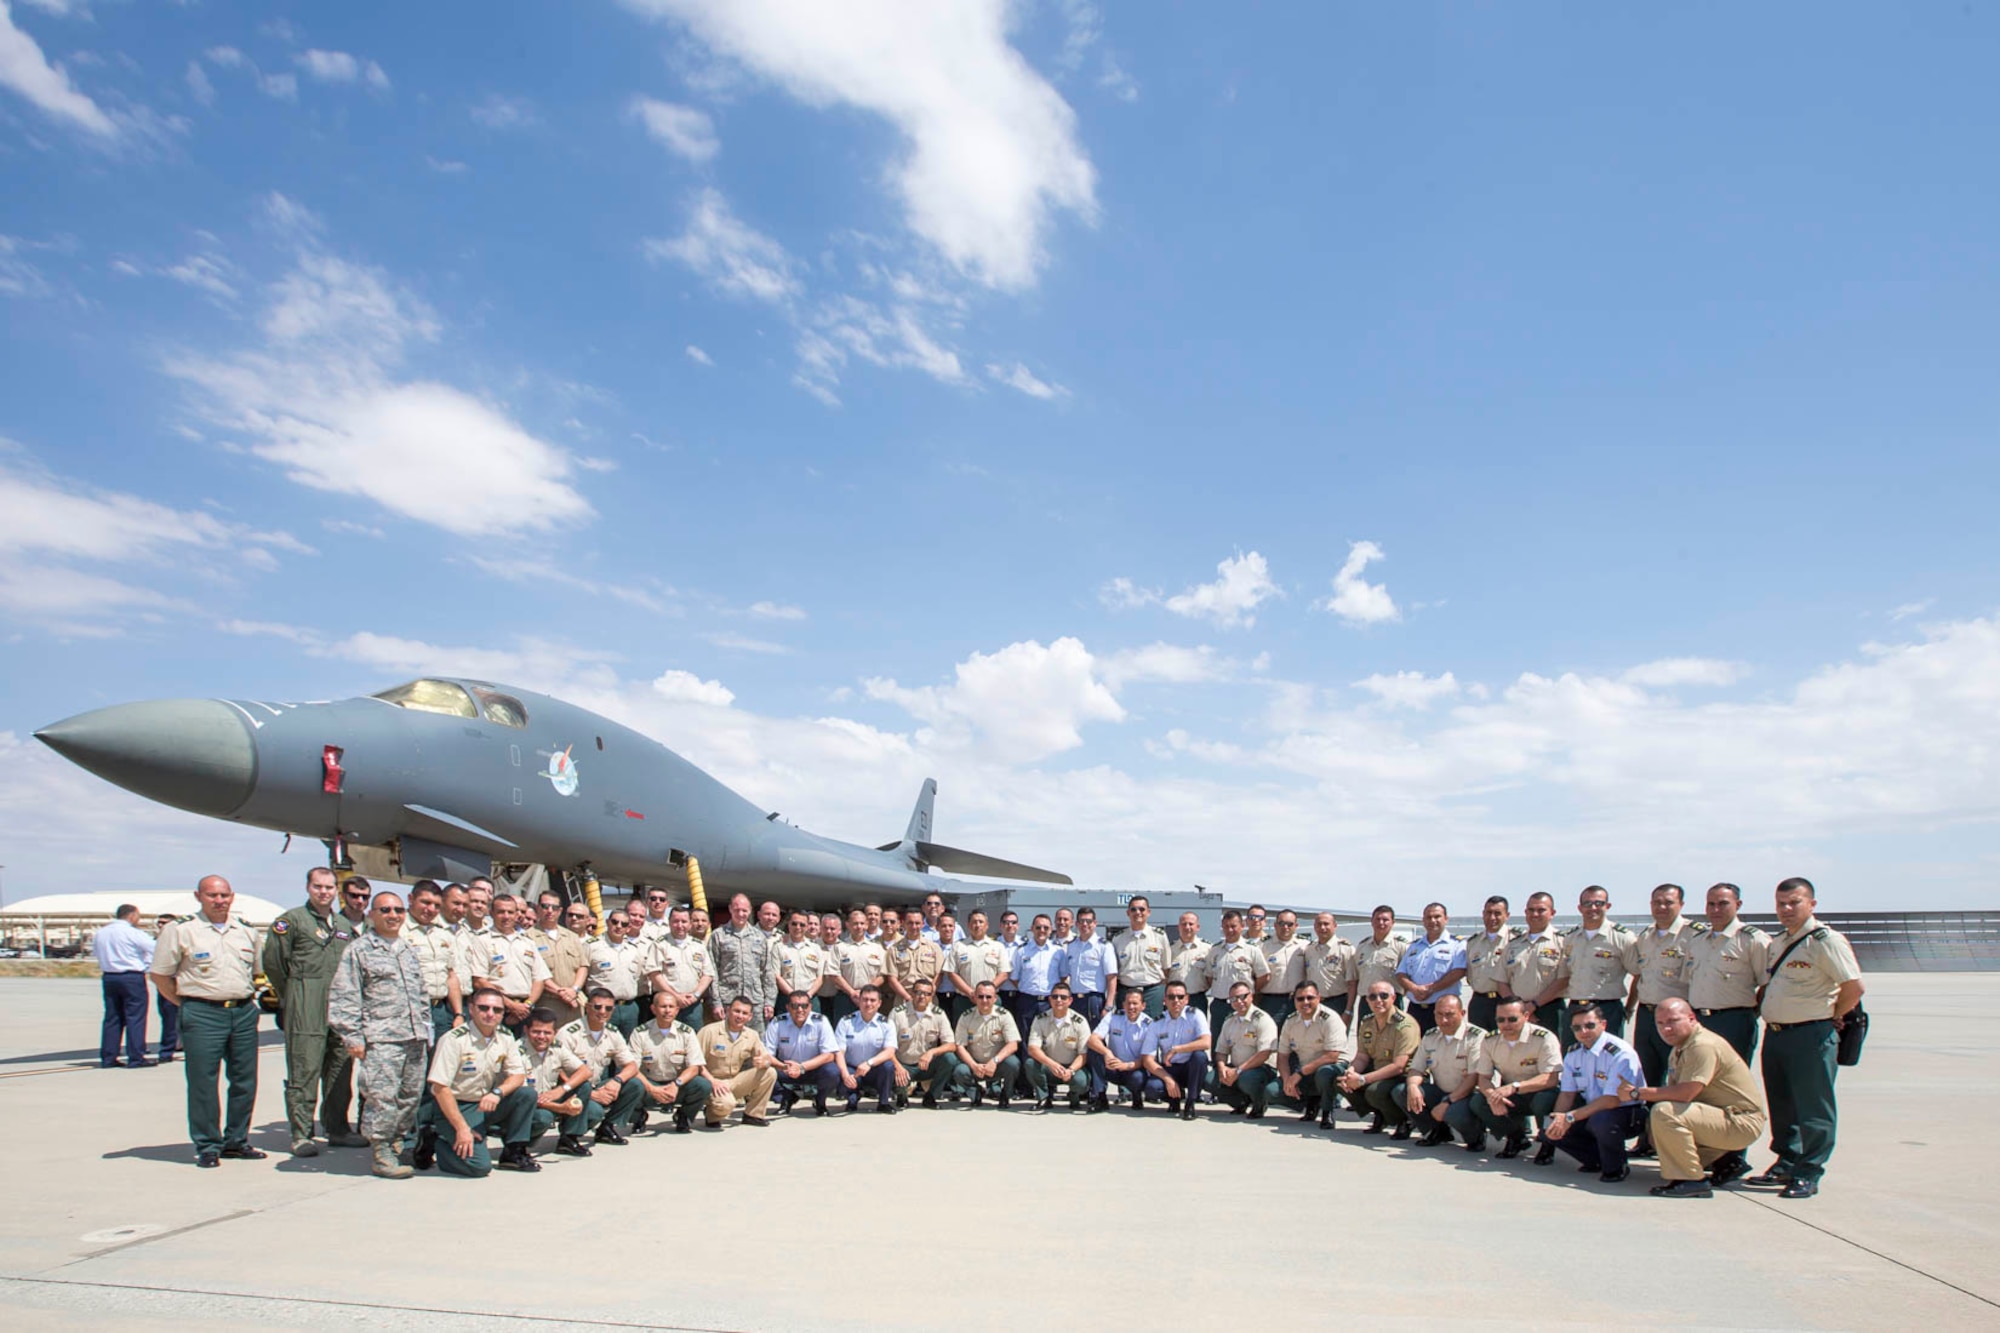 Members of the Republic of Colombia's military pose for a photo in front of a B-1B Lancer as part of their visit to Edwards Sept. 12. (U.S. Air Force photo by Christopher Okula)